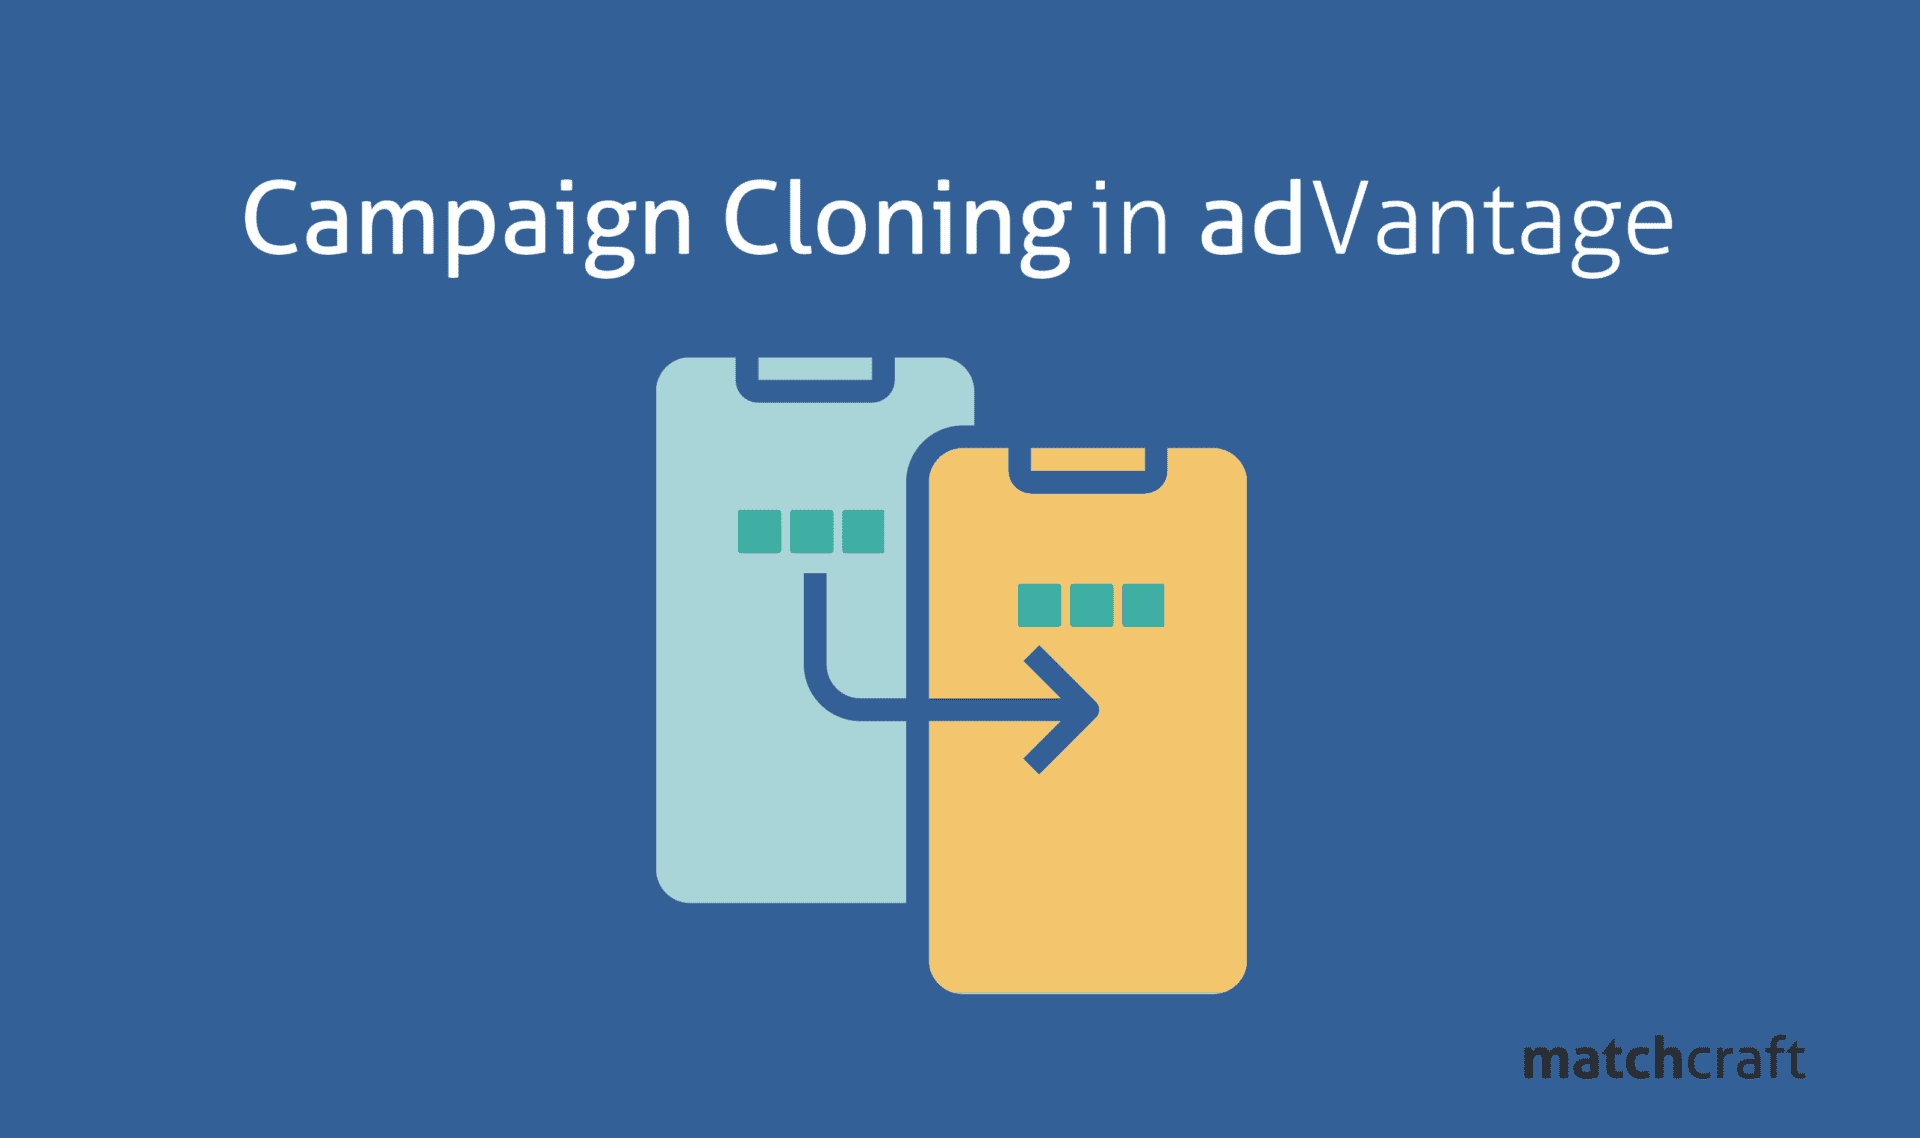 Campaign Cloning